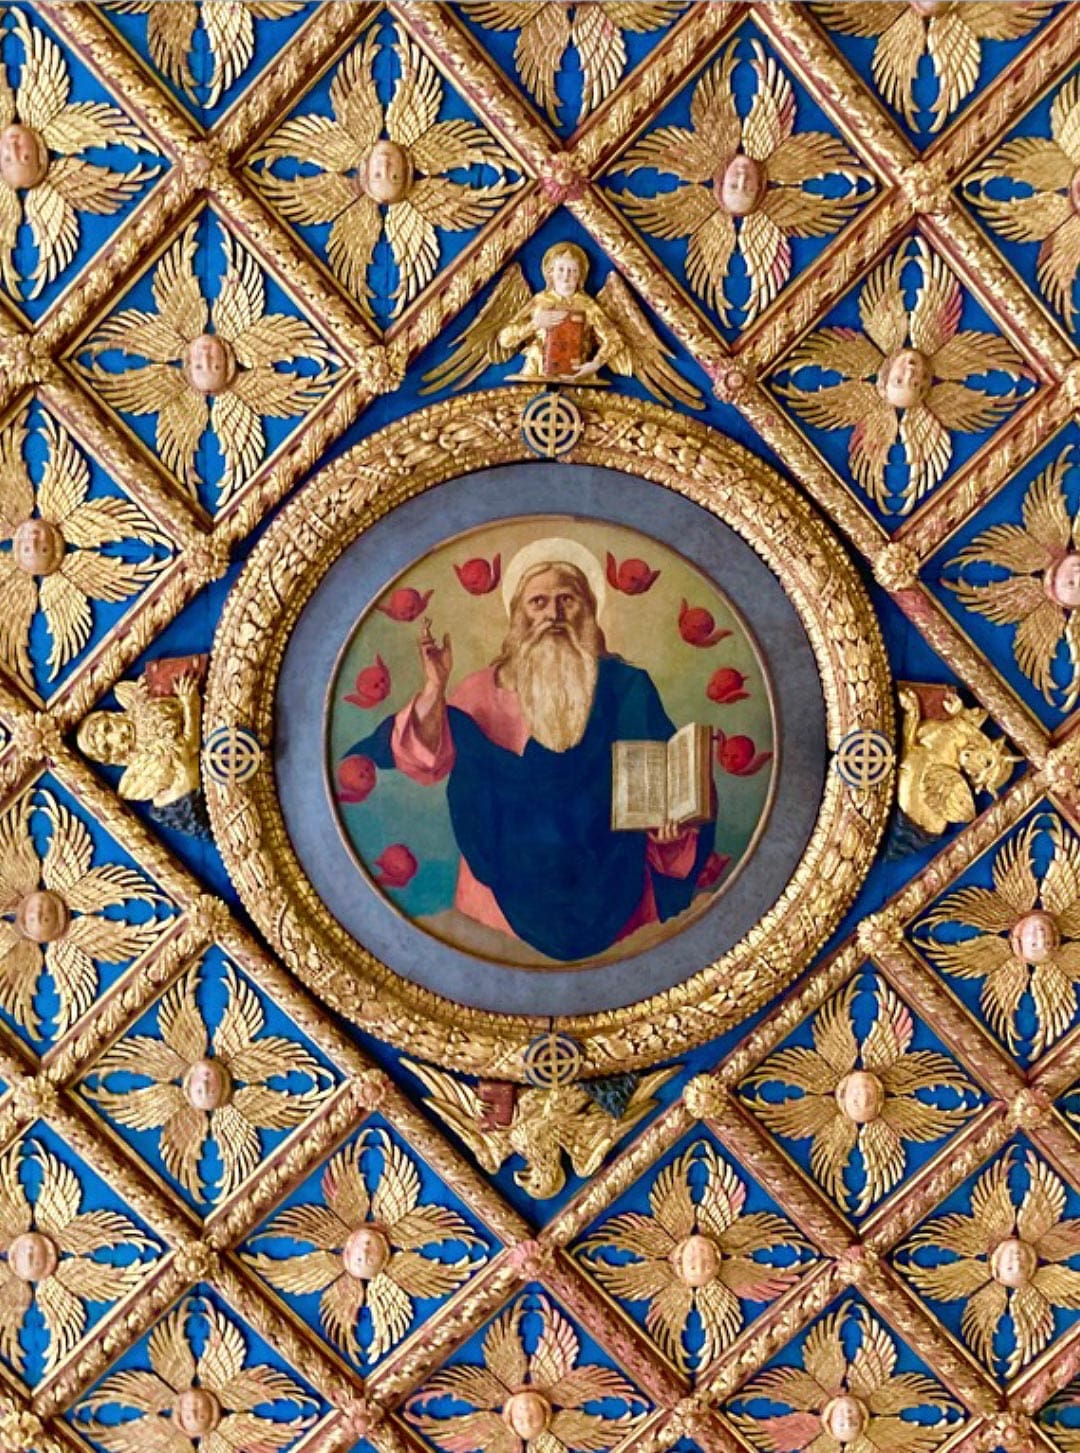 Image of God the Father on the ceiling